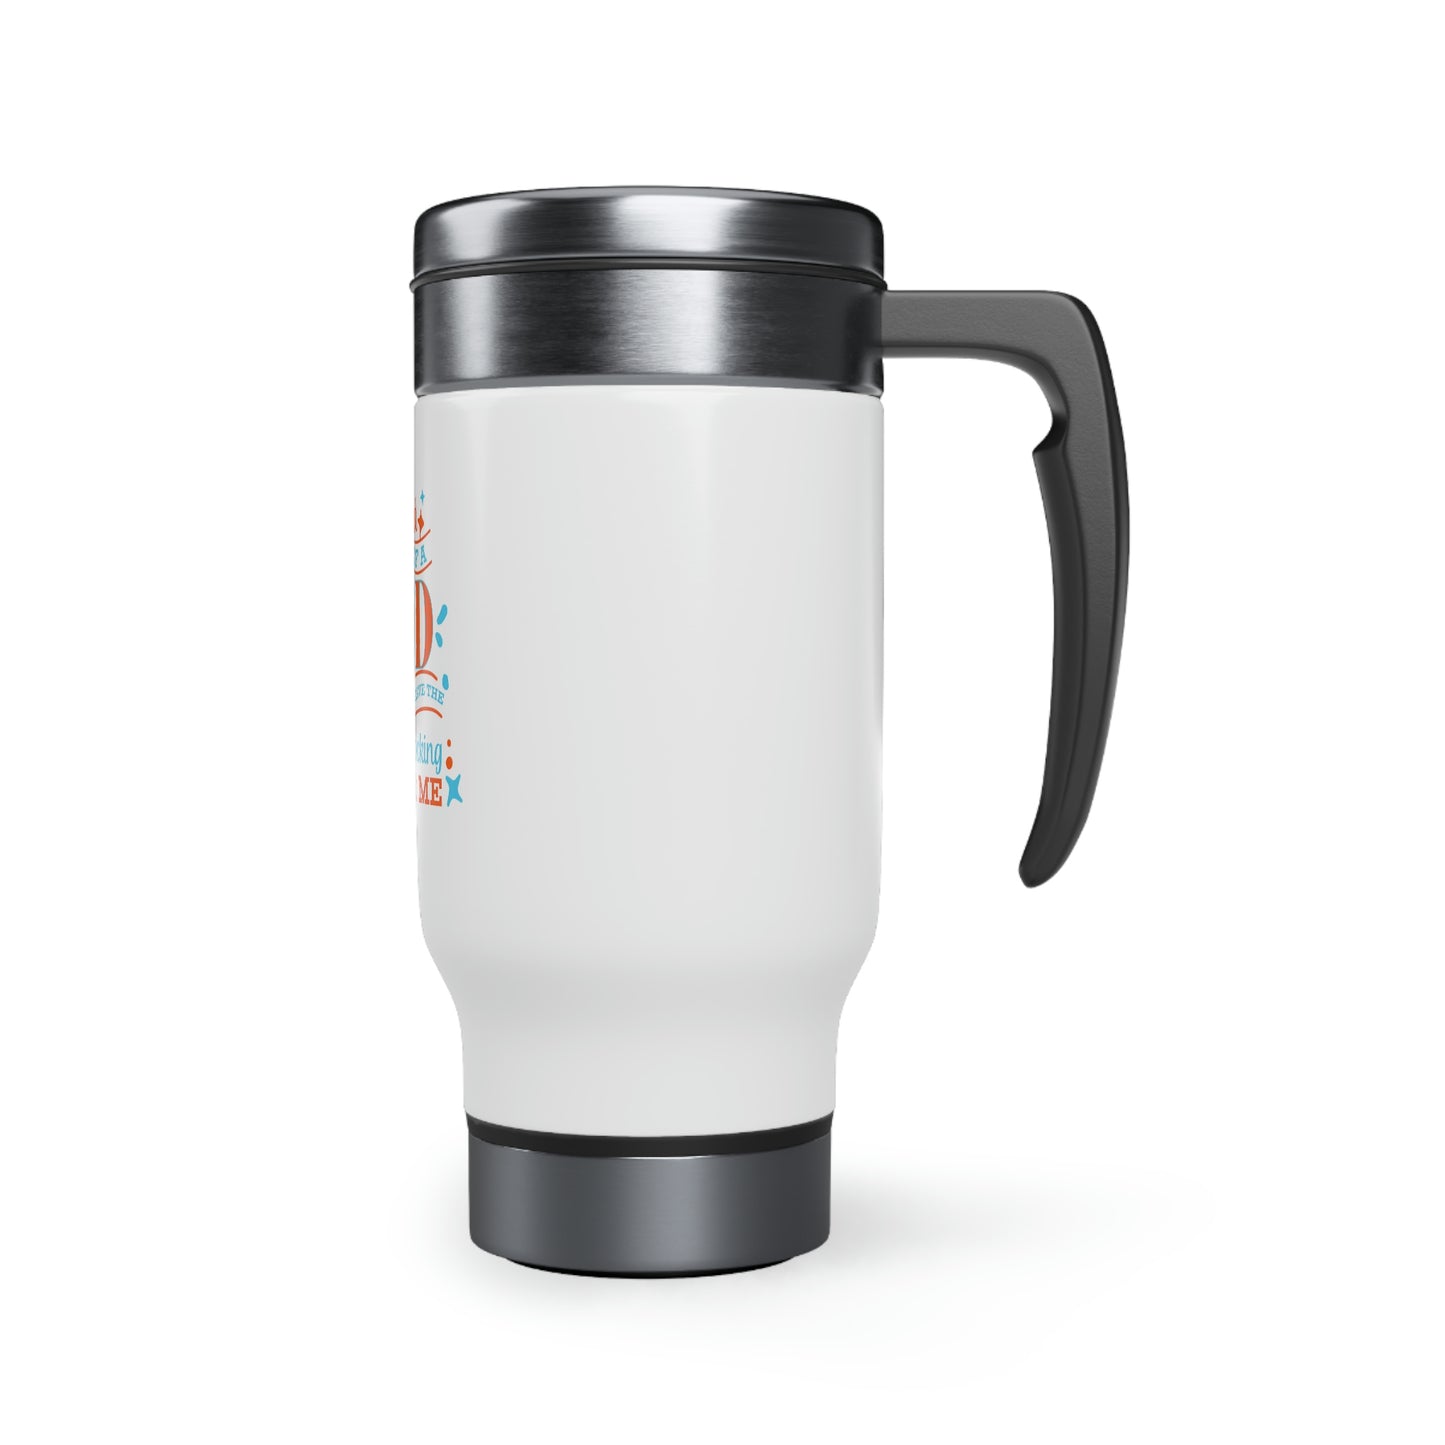 Proud Child Of A God Who Would Leave The 99 Looking For Me Travel Mug with Handle, 14oz